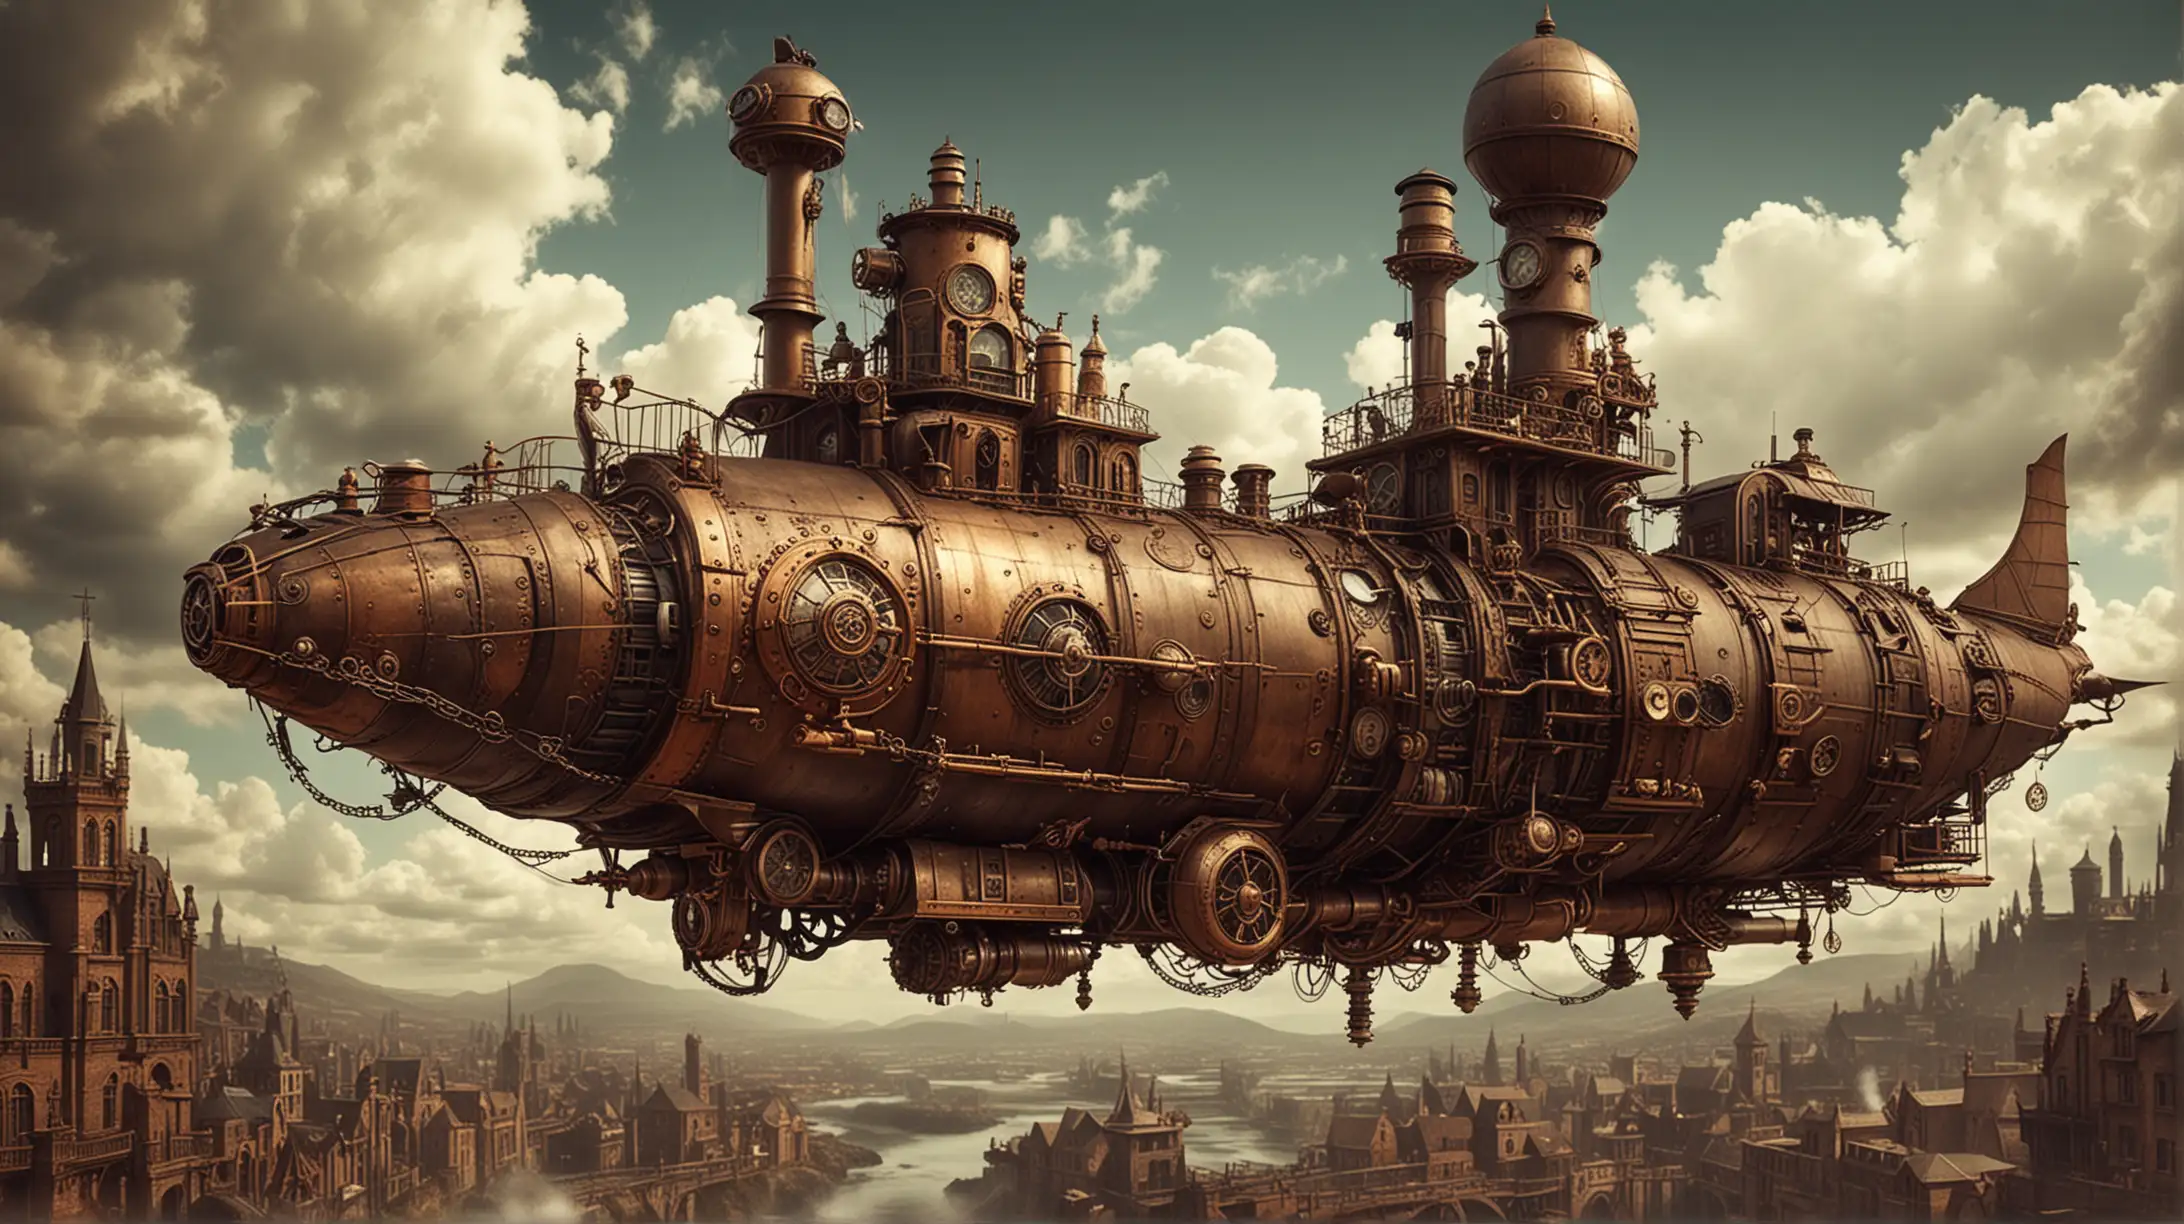 the steampunk version of  the image